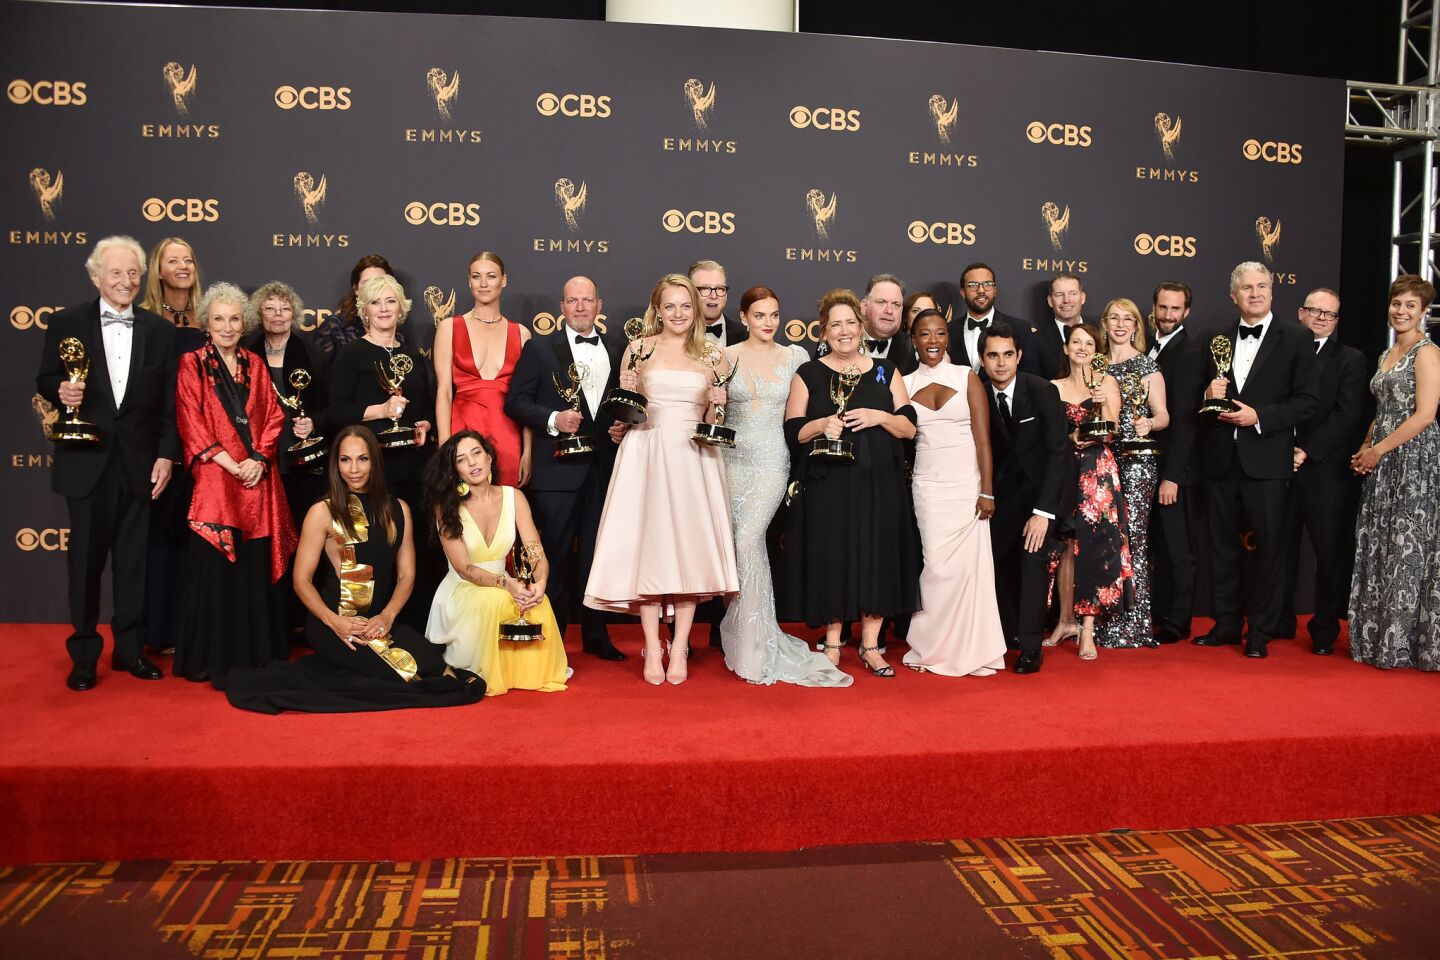 'The Handmaid's Tale' cast and crew